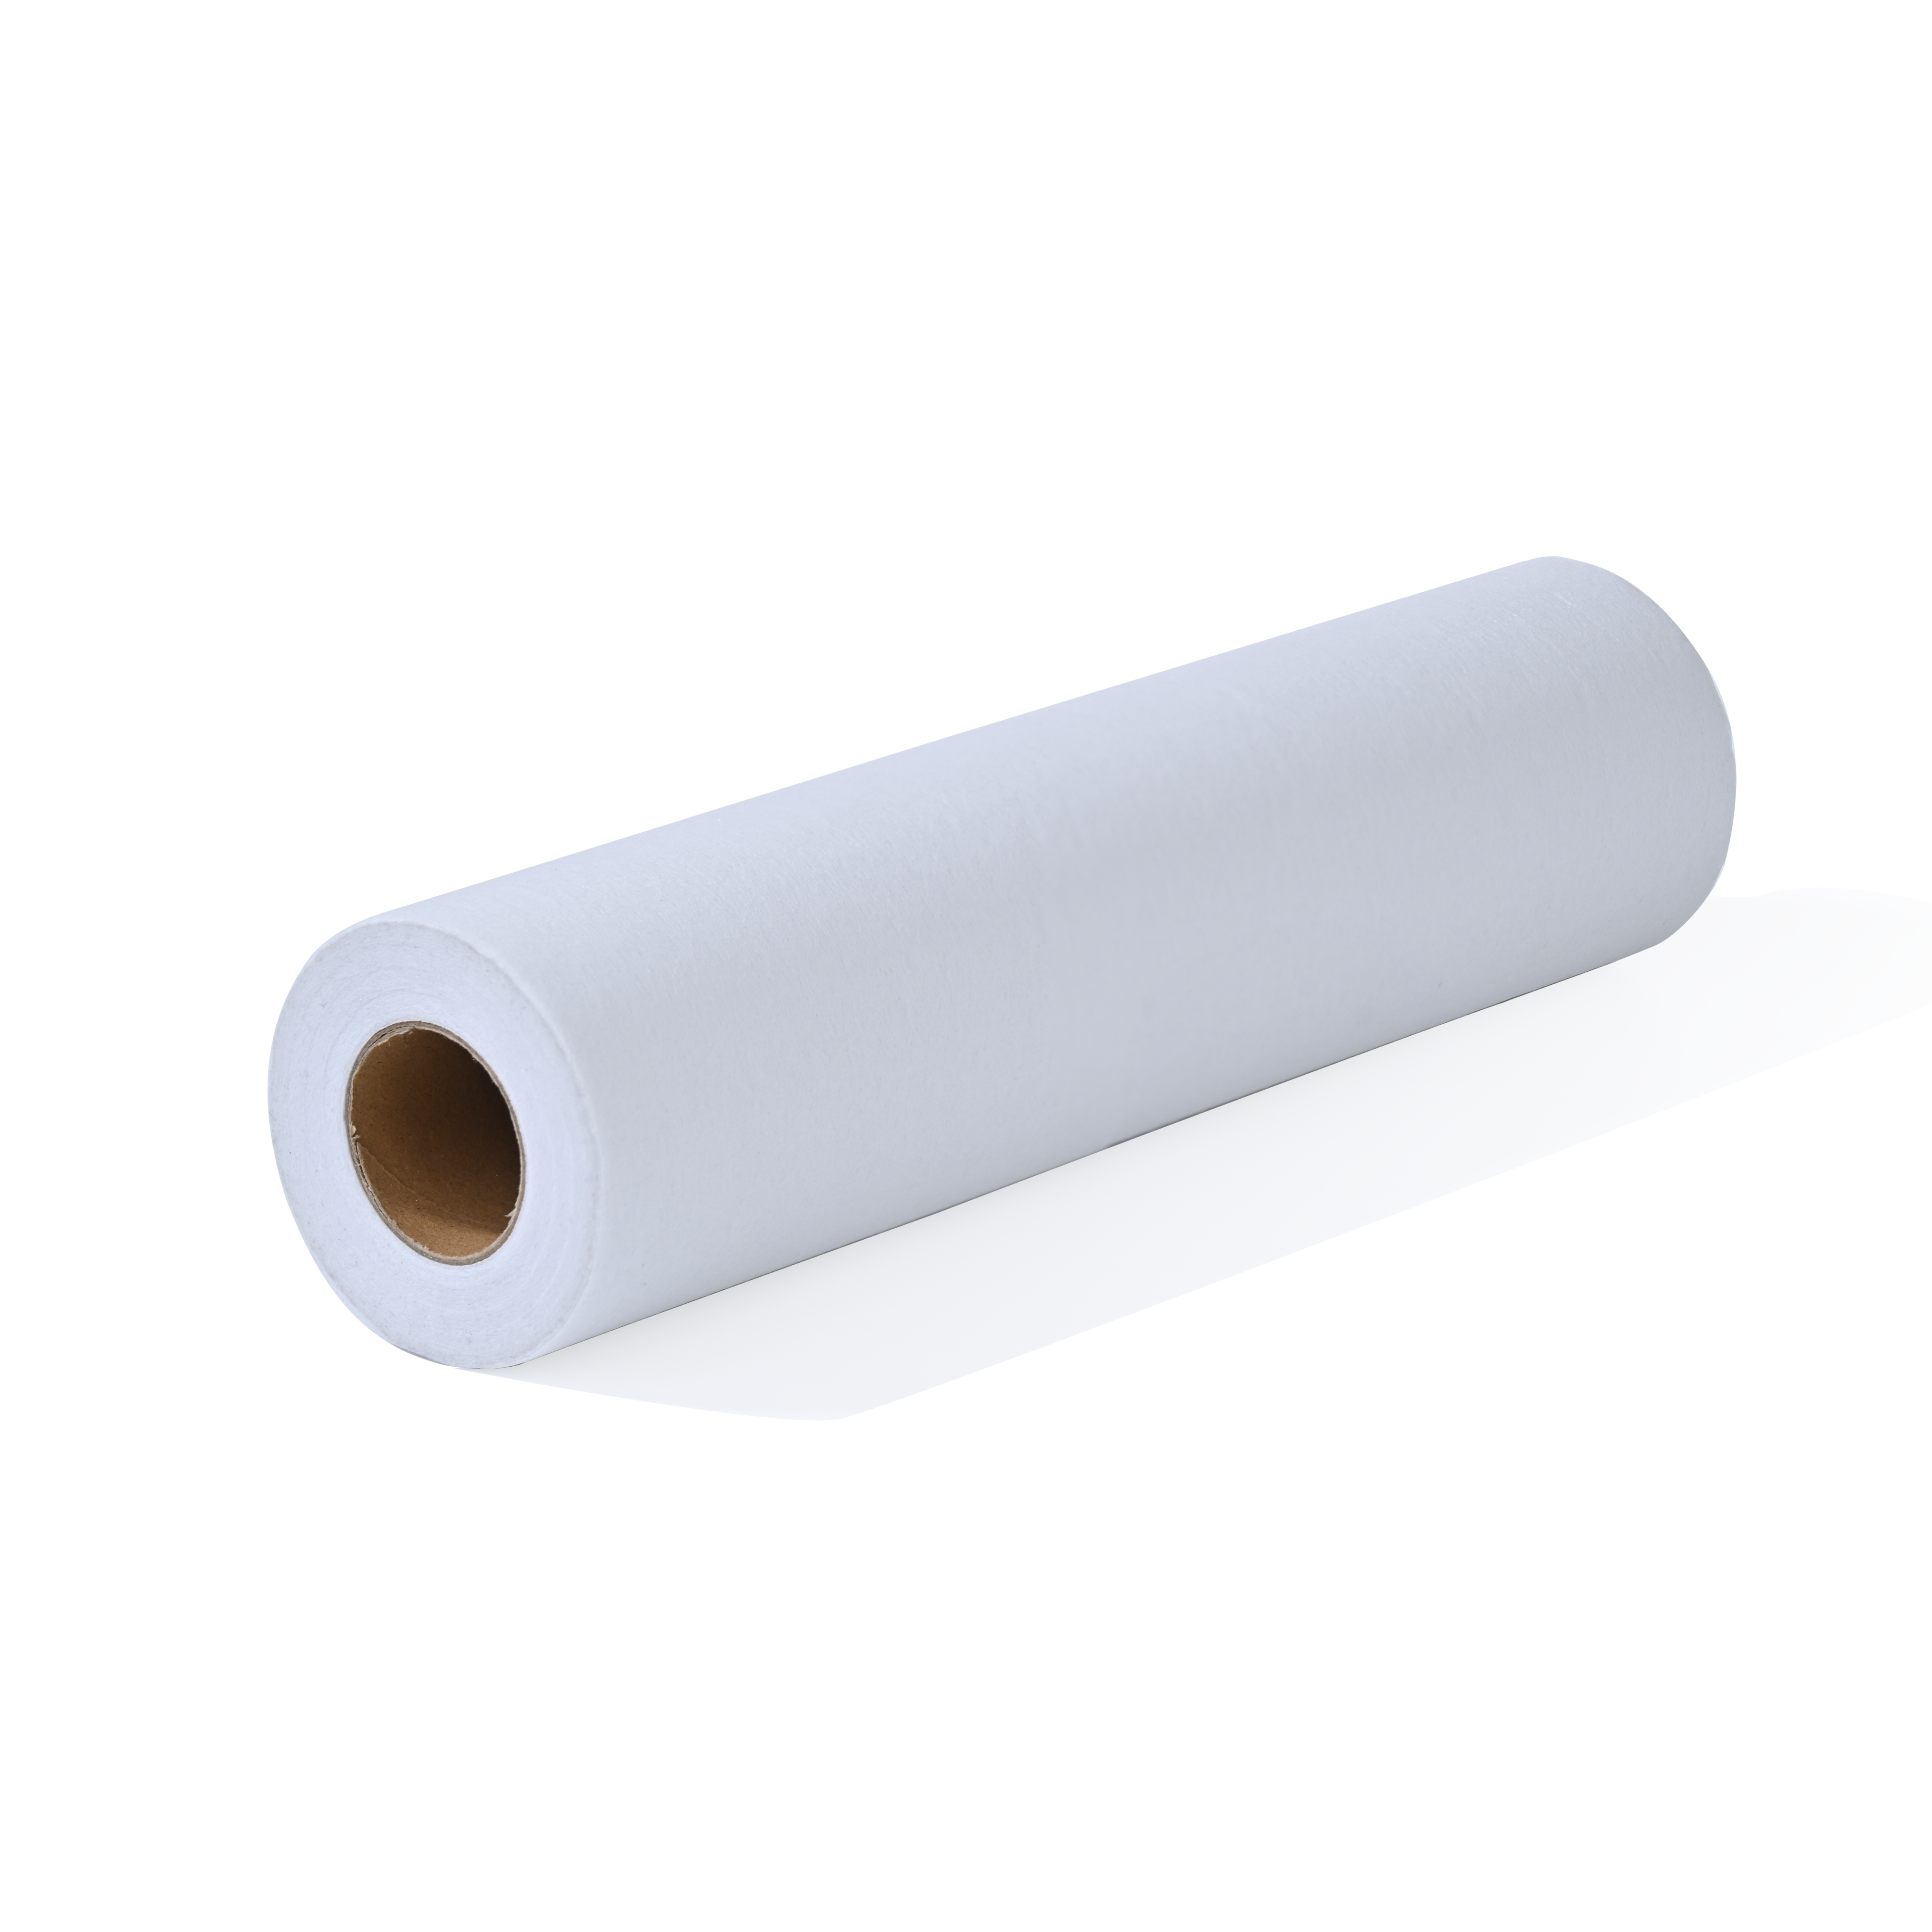 Fusible iron on machine embroidery stabilizer rolls package 1.8oz